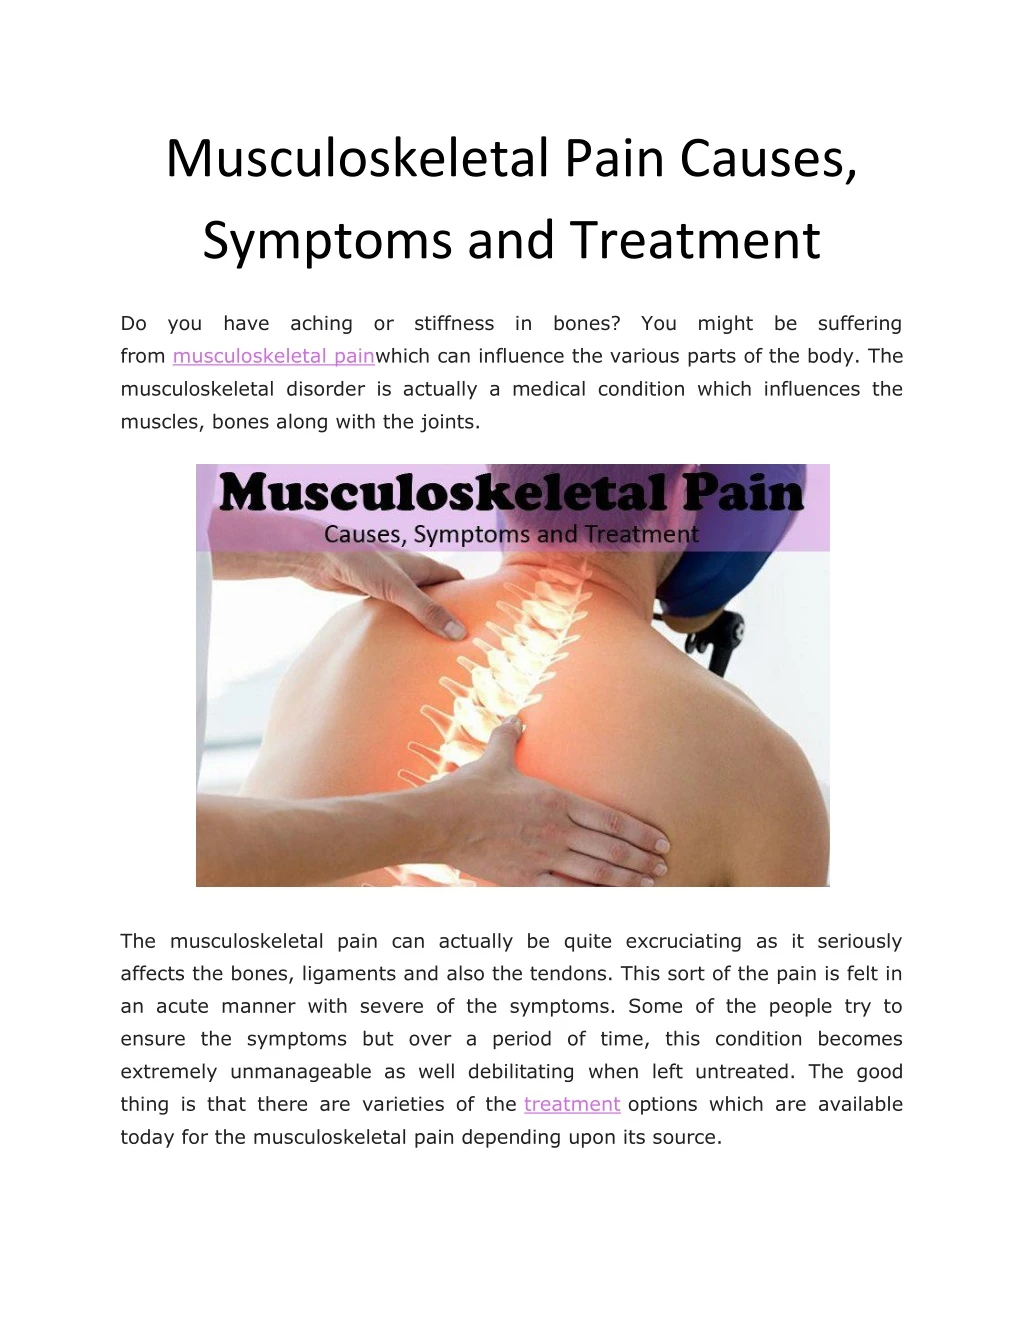 musculoskeletal pain causes symptoms and treatment